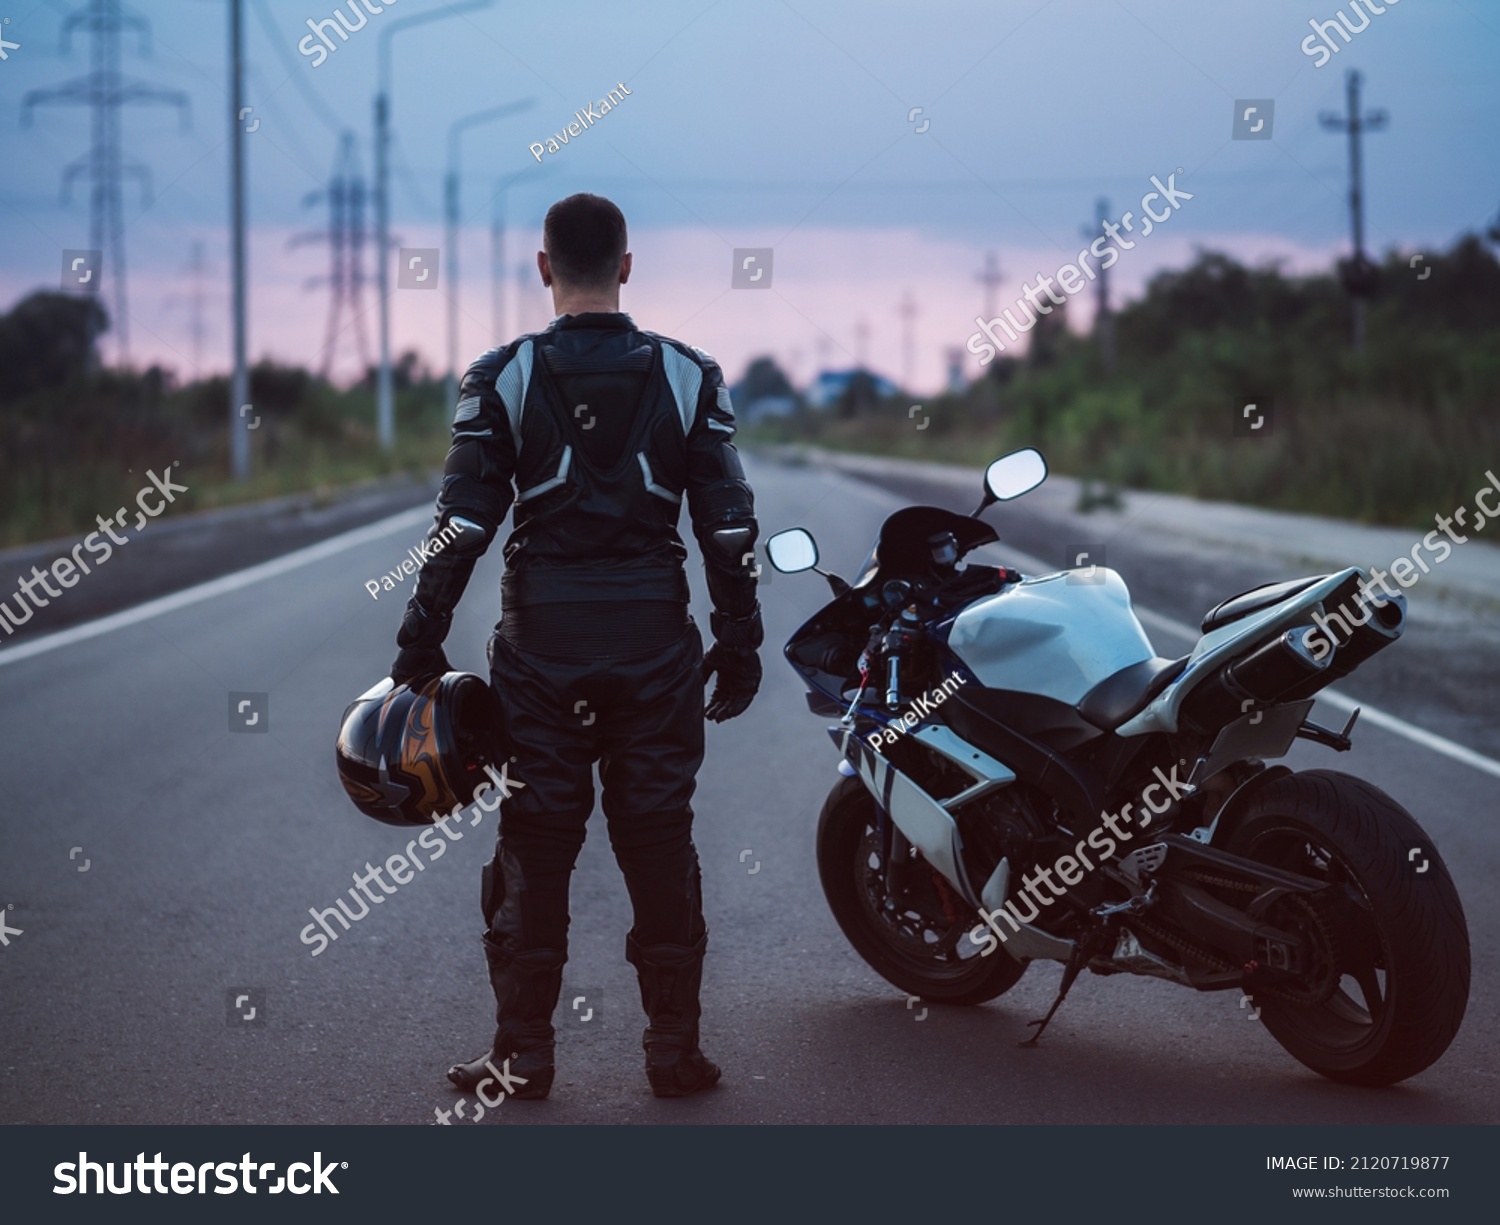 A biker stands next to a motorcycle on an asphalt road and looks into the distance. Summer sunset #2120719877